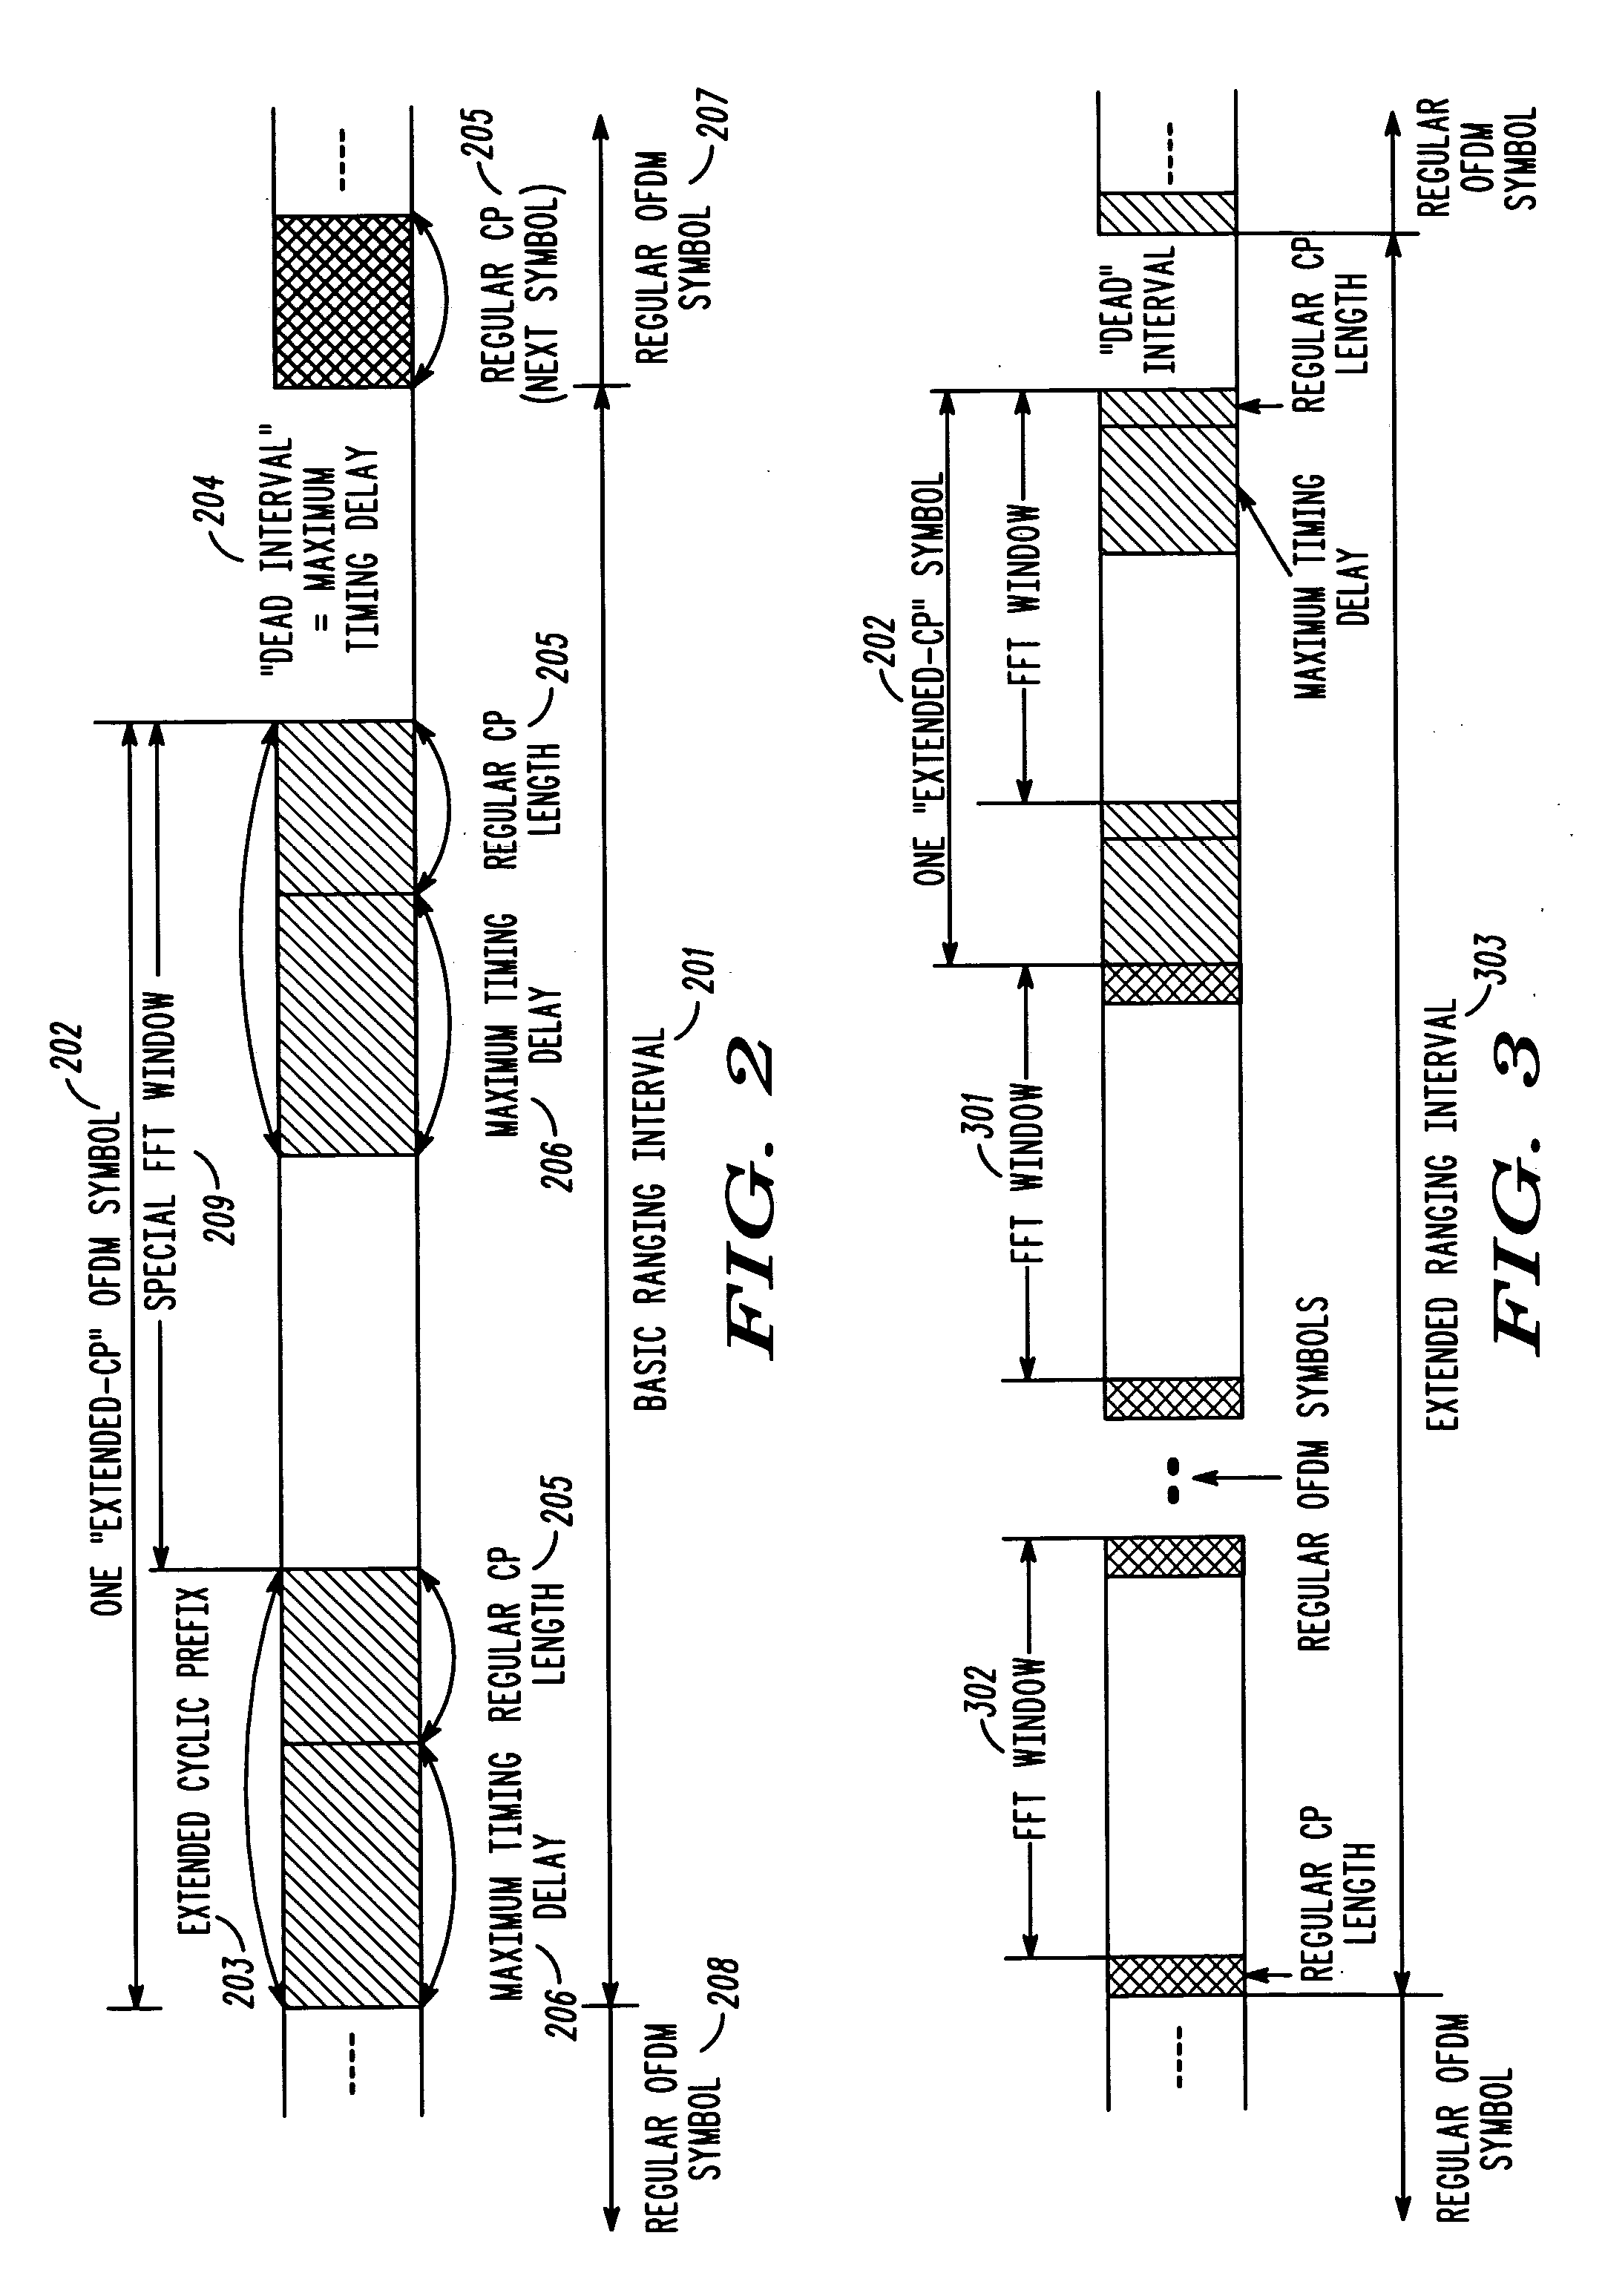 Method and apparatus for accessing a wireless communication system